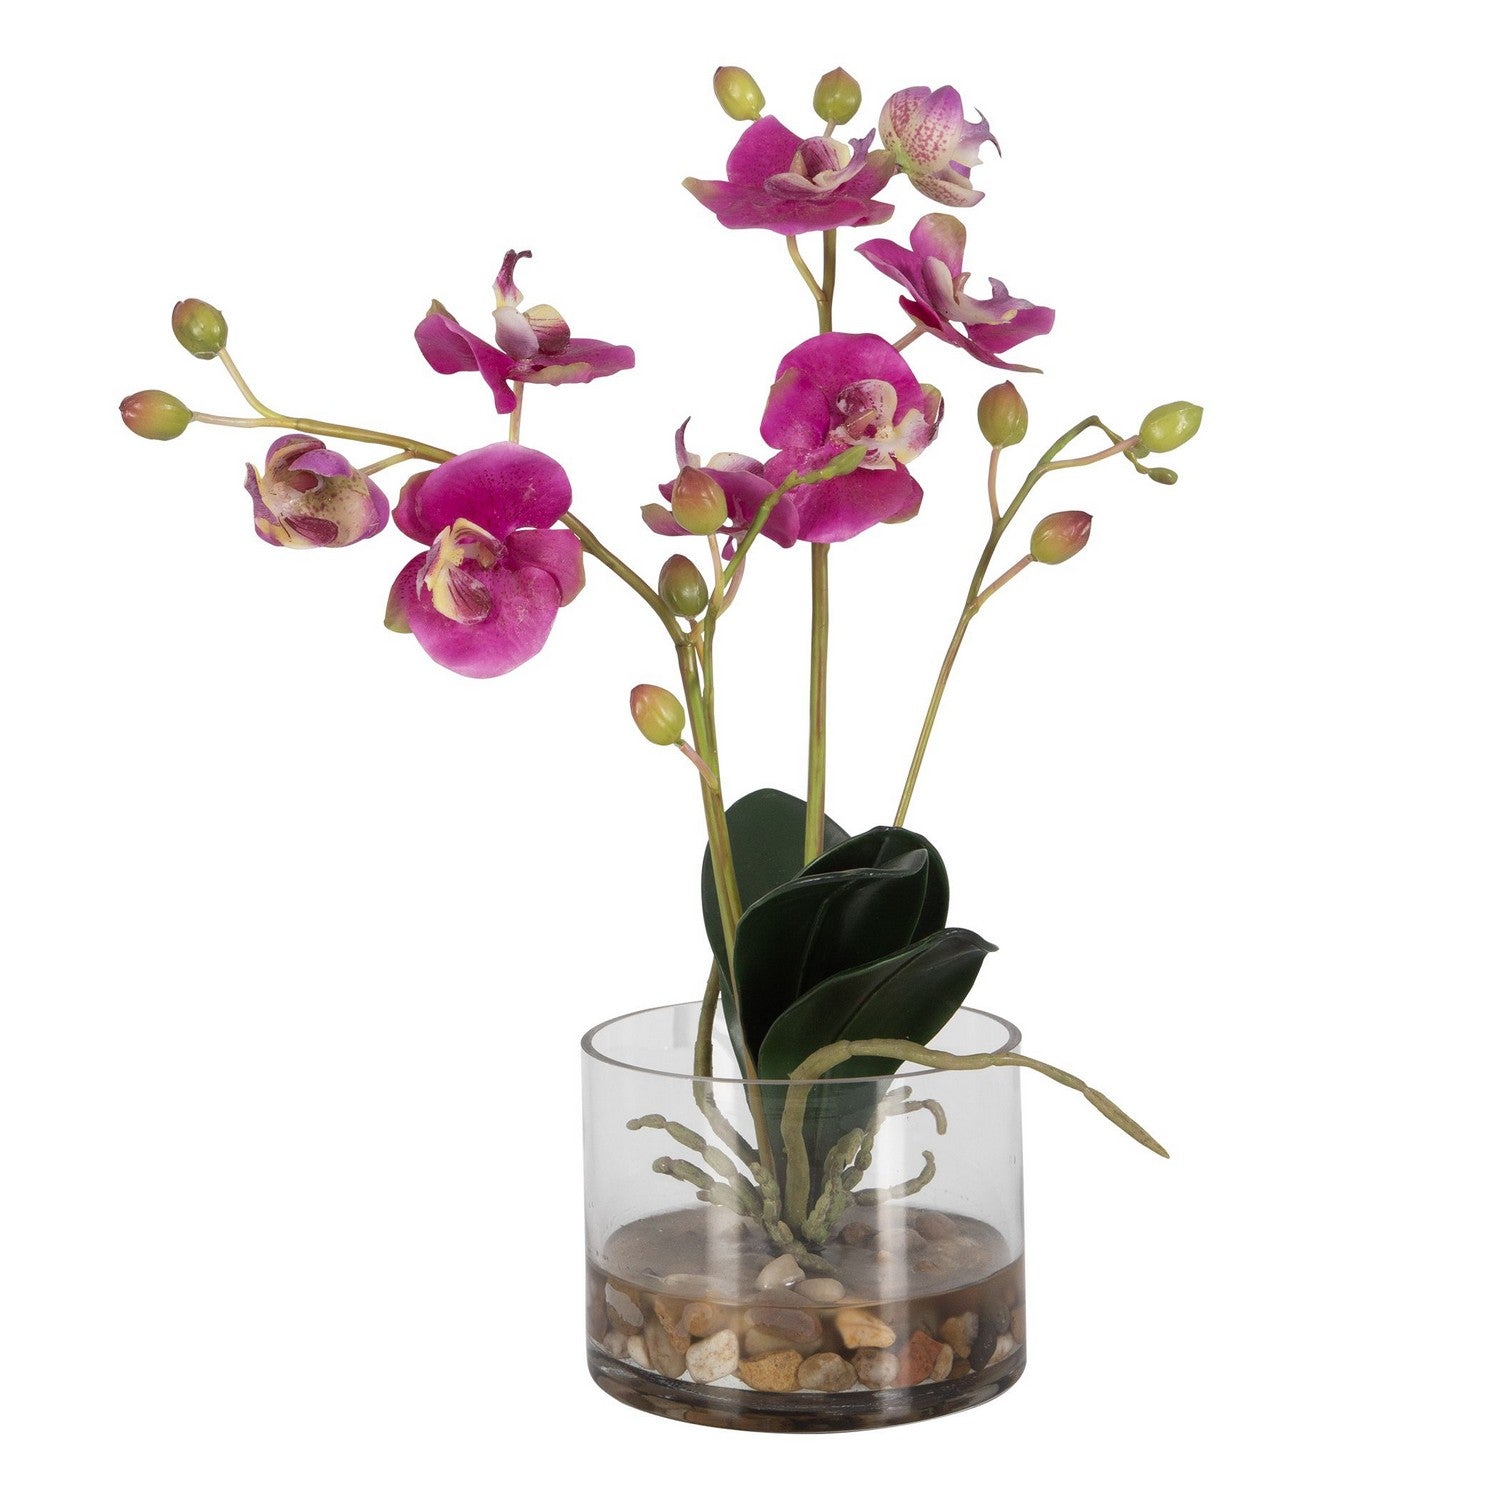 Uttermost - 60220 - Orchid - Glory Orchid - Fuchsia